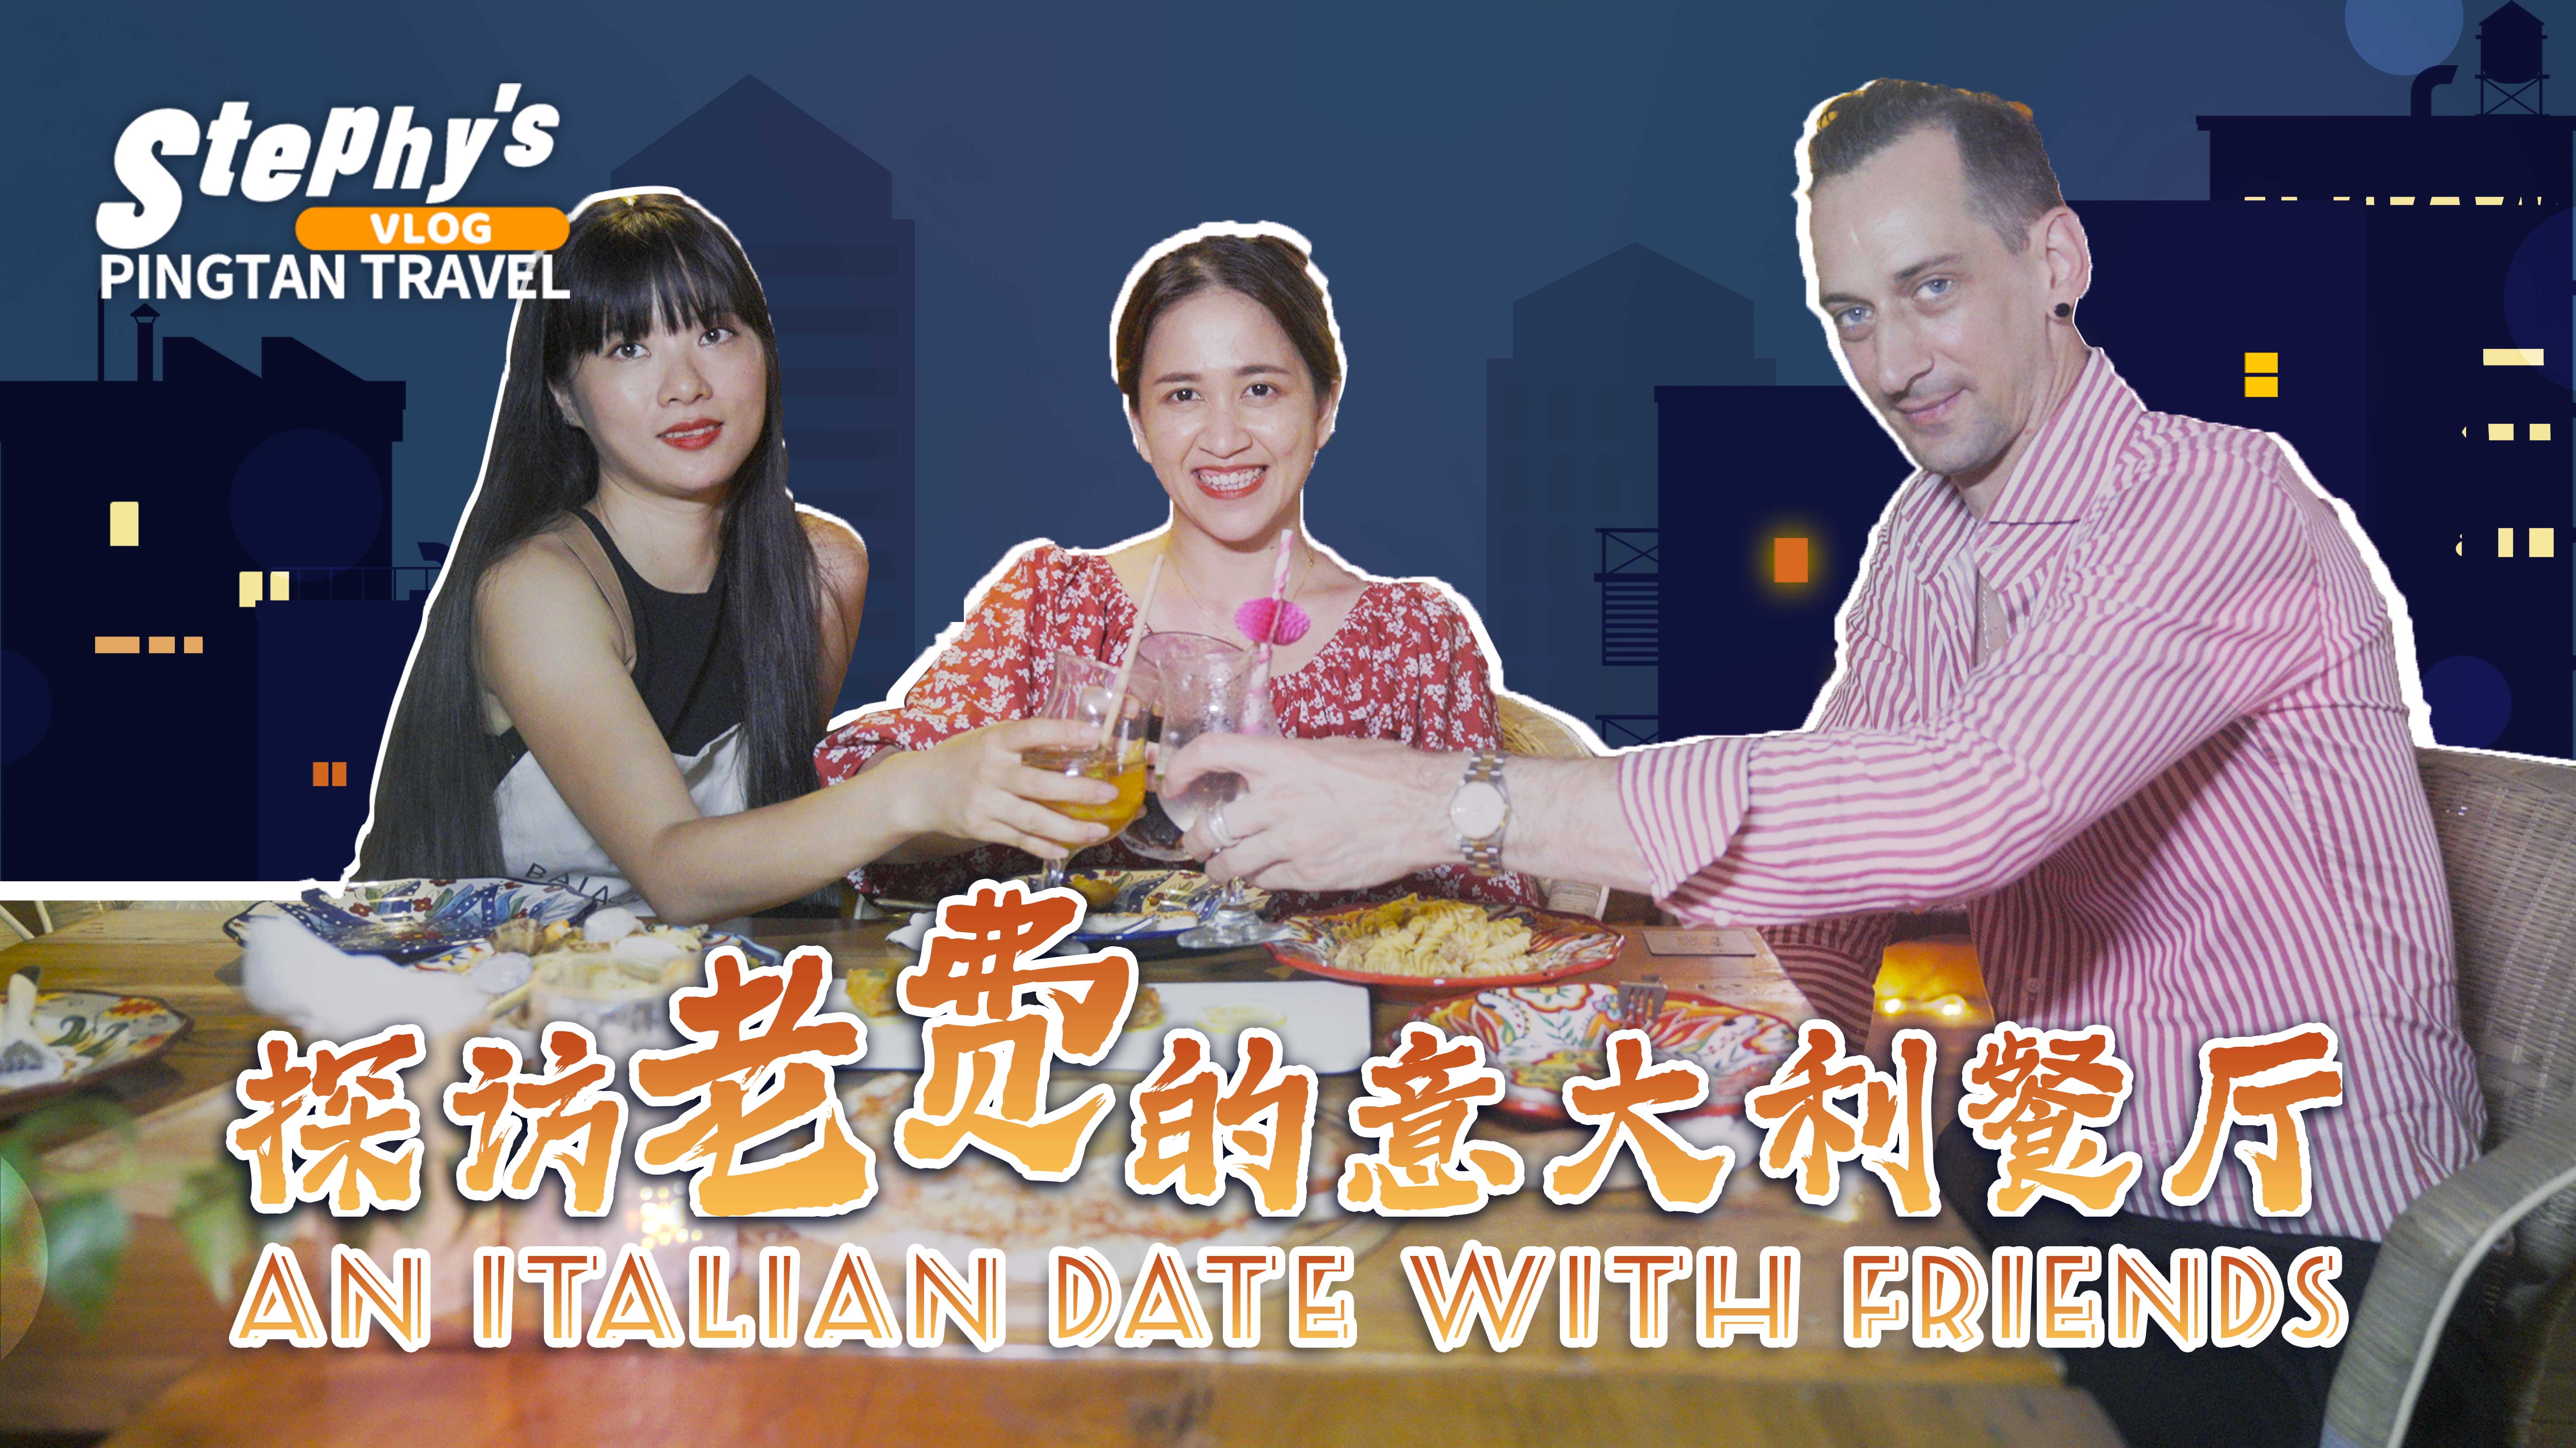 Stephy’s Pingtan Travel: An Italian date with friends